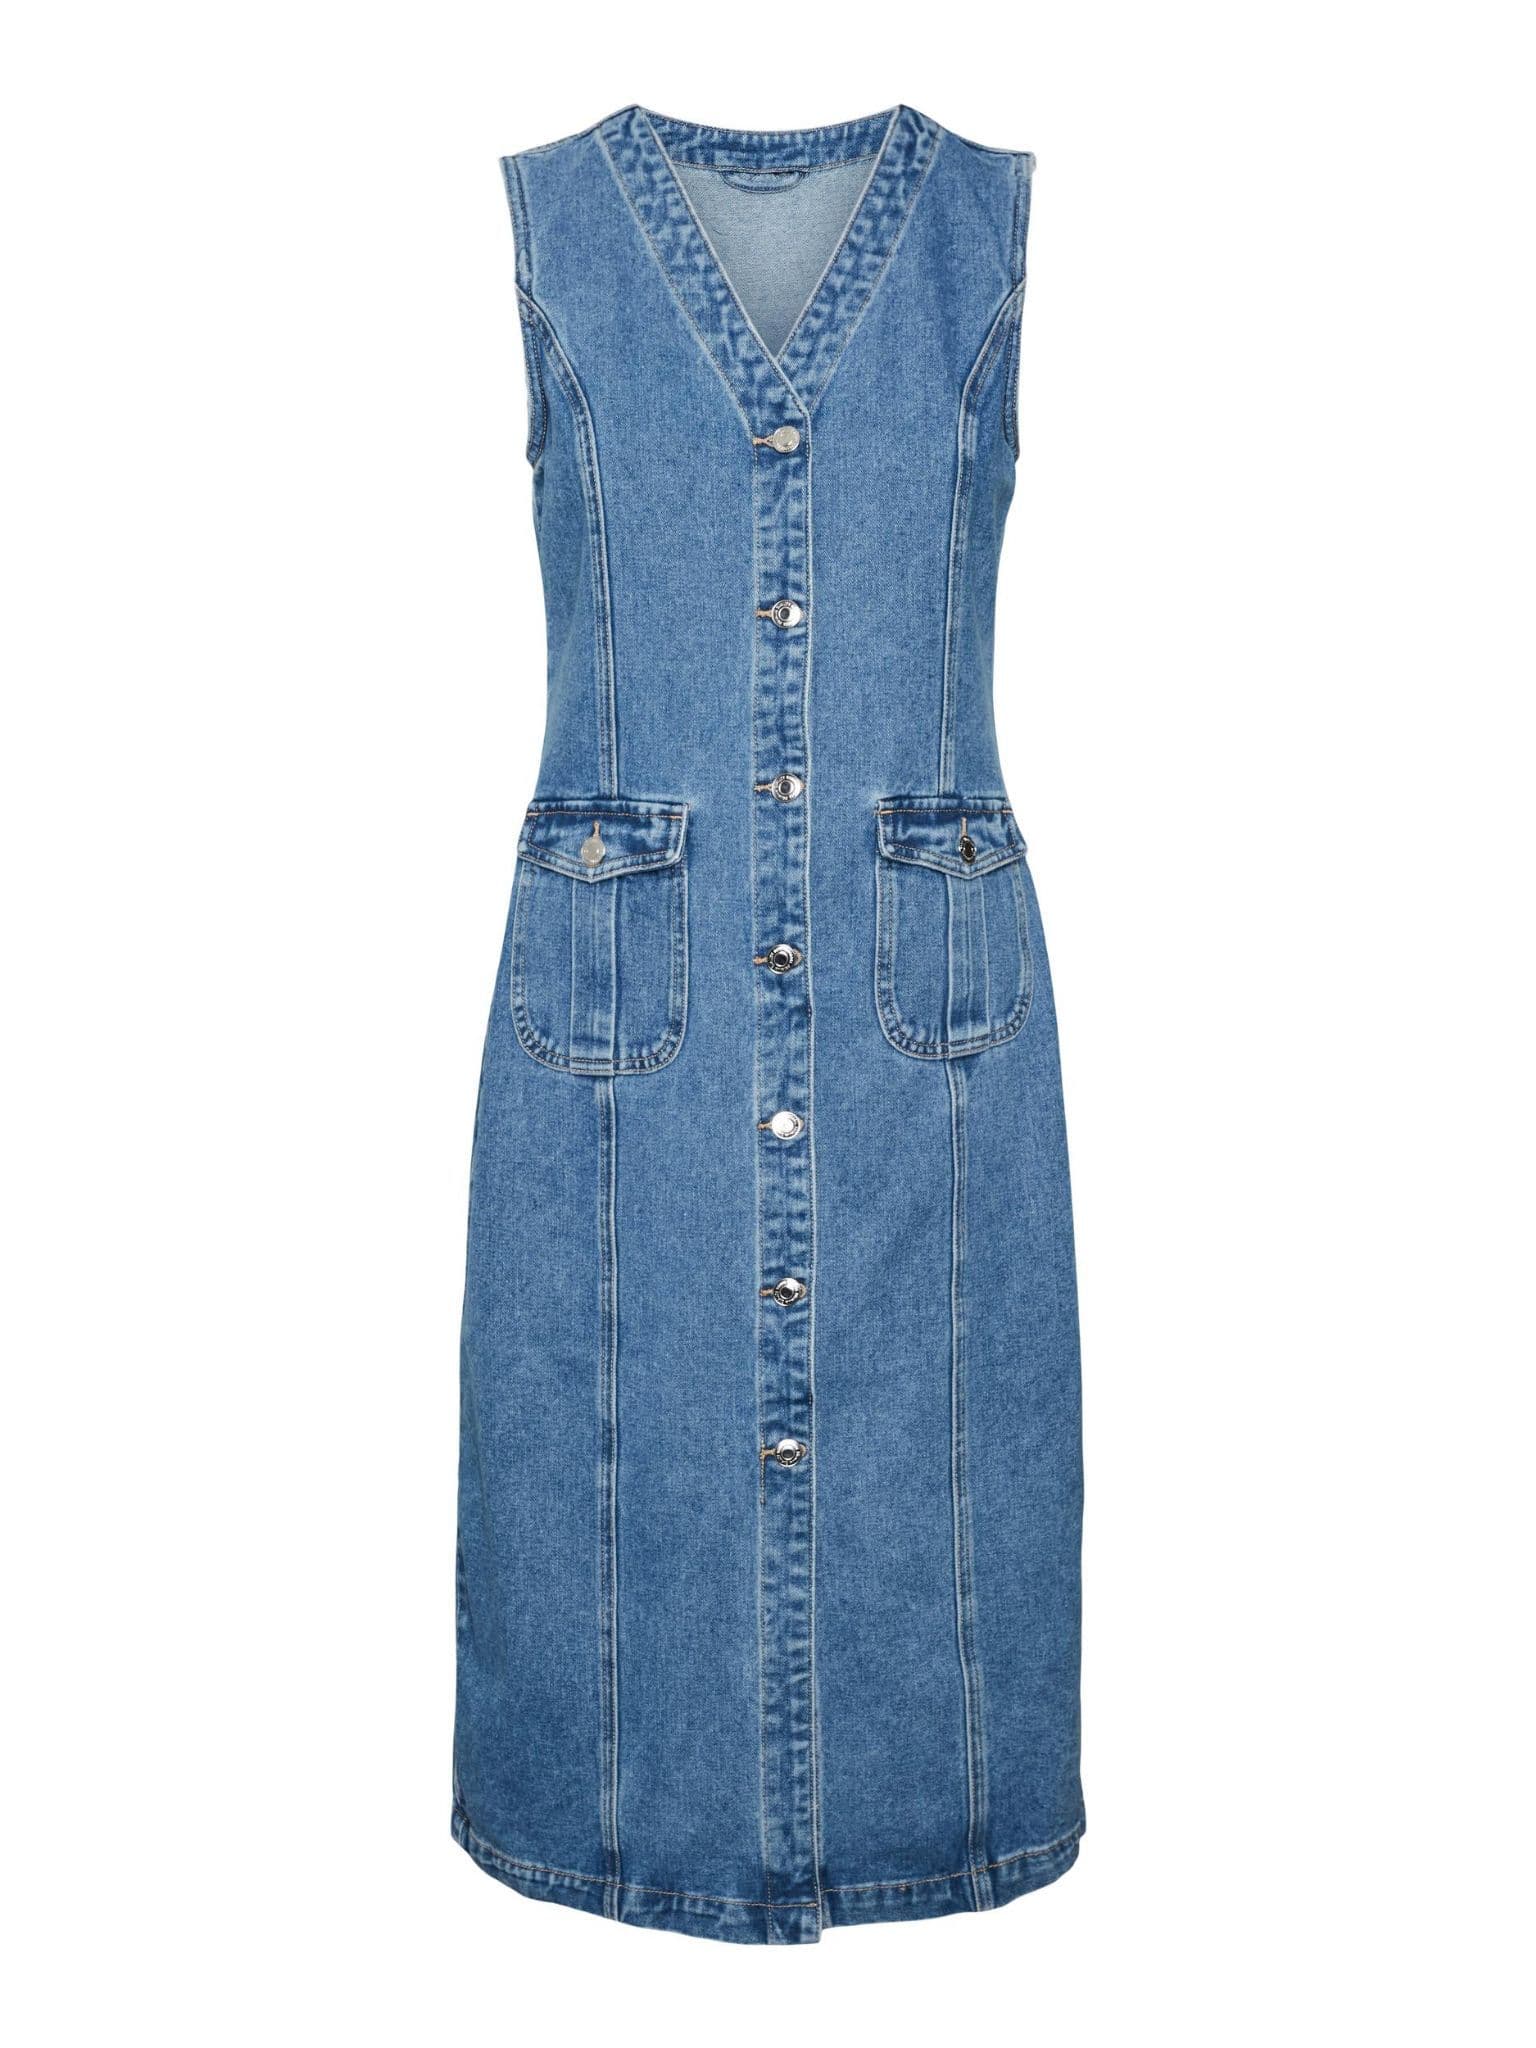 Denim Button Up Dress - Out of the Blue